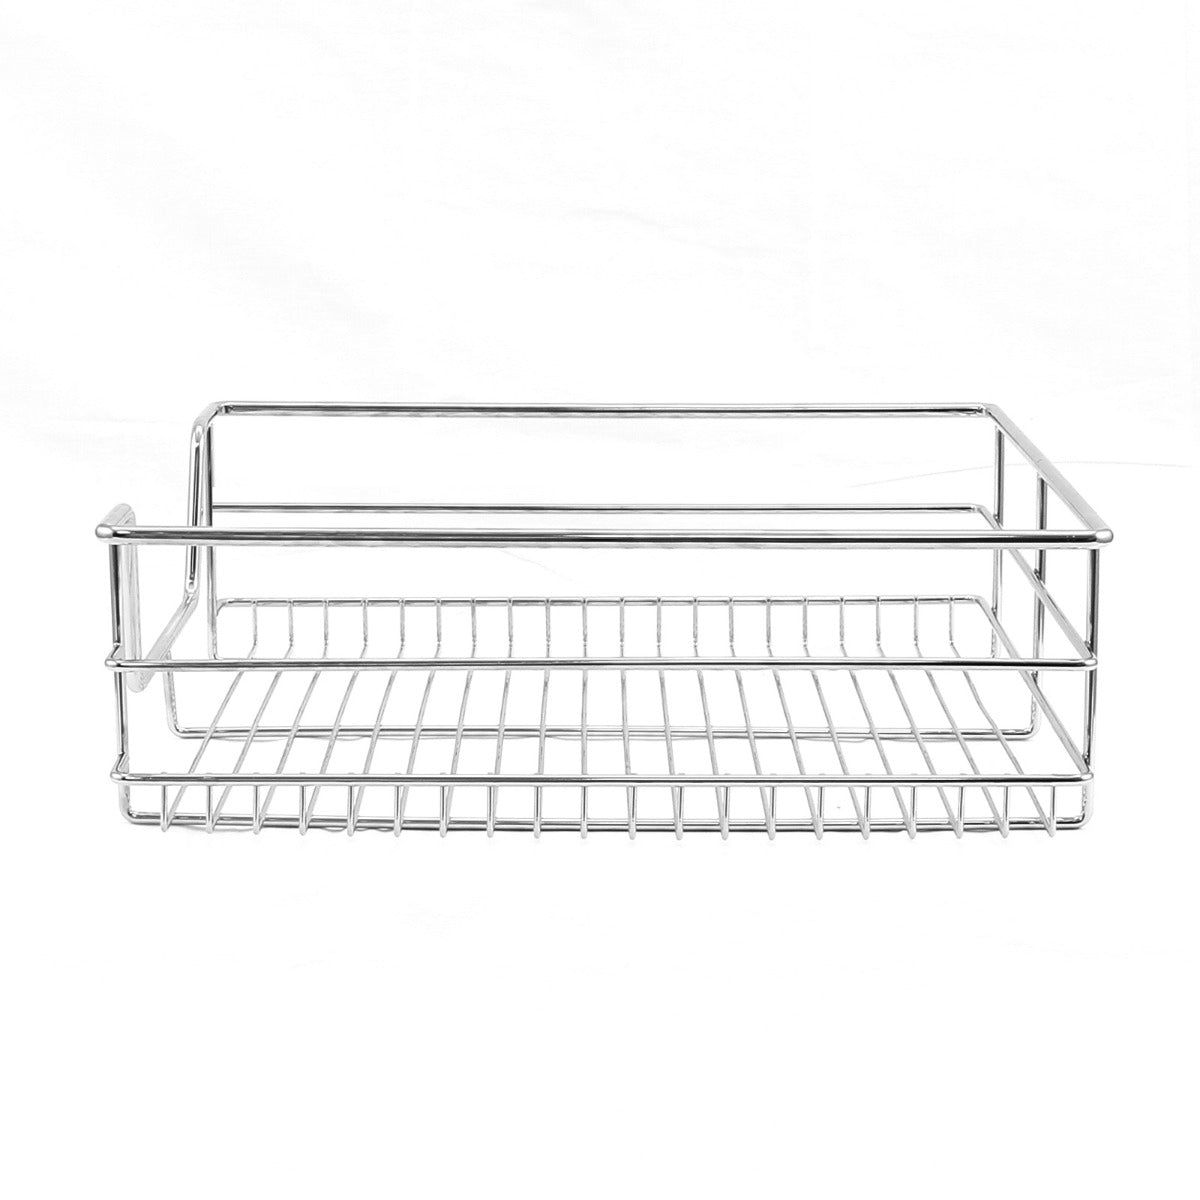 3 x KuKoo Kitchen Pull Out Storage Baskets – 600mm Wide Cabinet